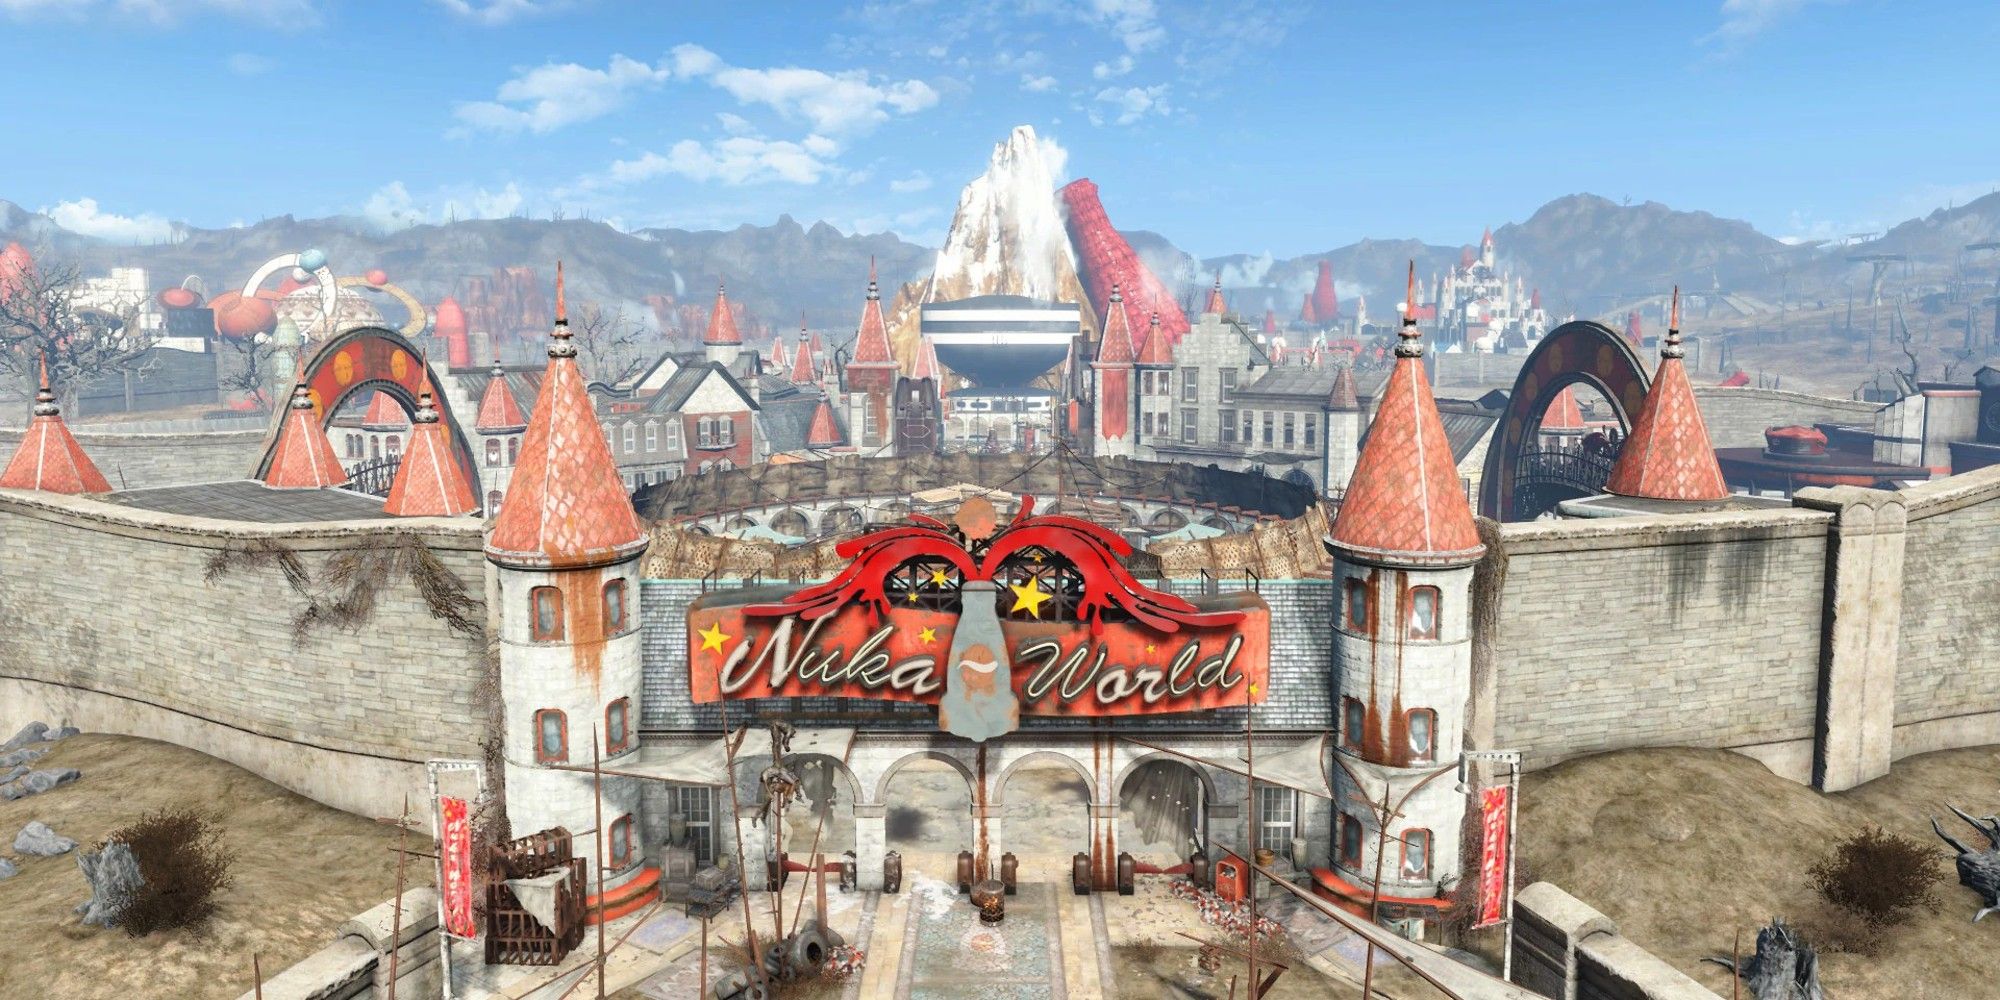 Fallout 4 Nuka World front with the sign showing